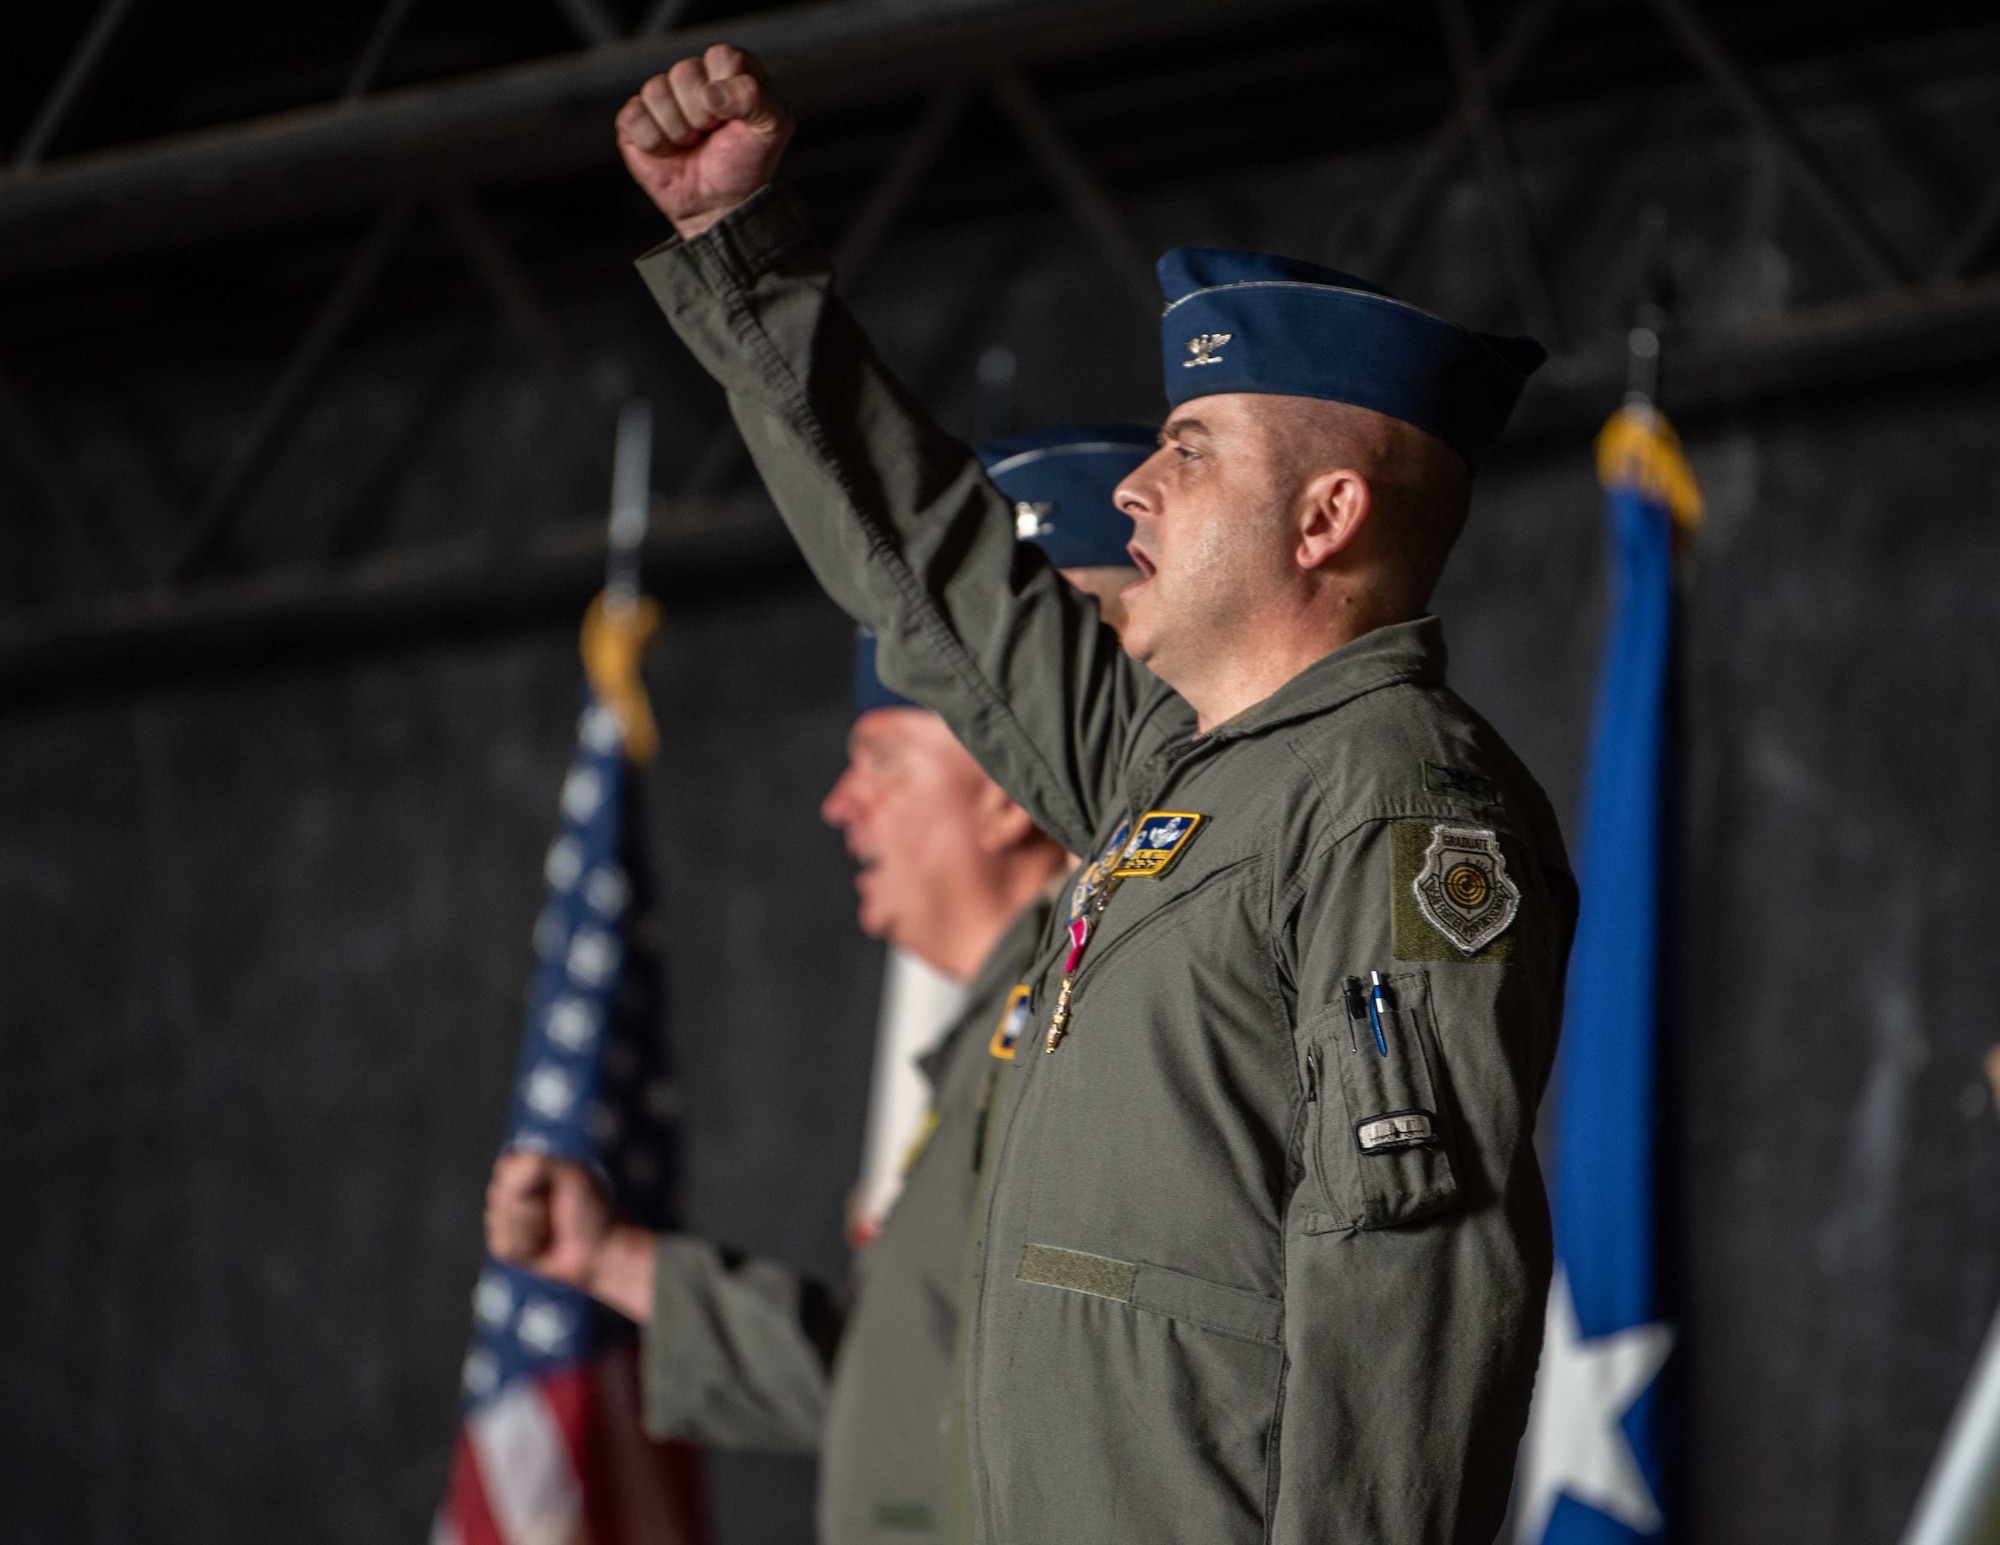 United States Air Force Col. Jesse J. Friedel, 35th Fighter Wing (FW) outgoing commander, sings the Air Force song during the 35th FW change of command ceremony at Misawa Air Base, Japan, June 30, 2022.